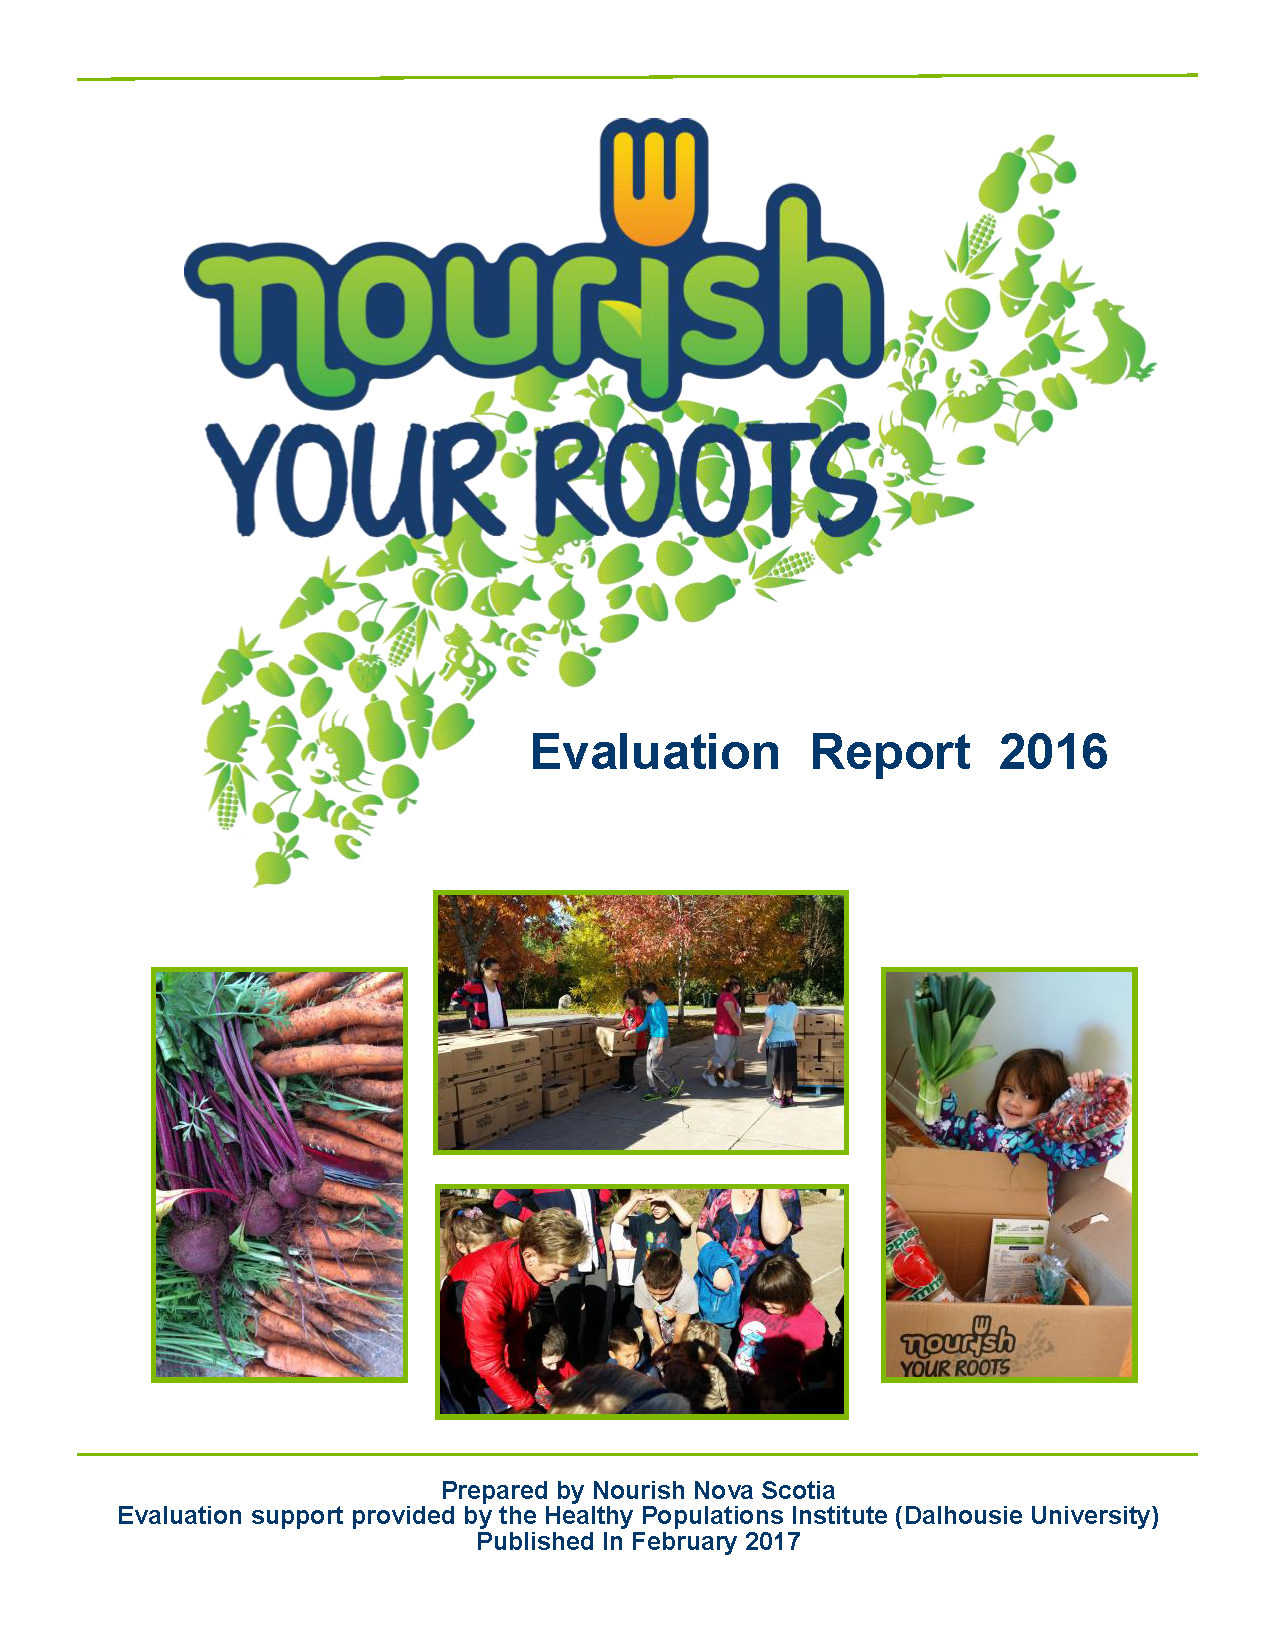 2016 Nourish Your Roots Evaluation